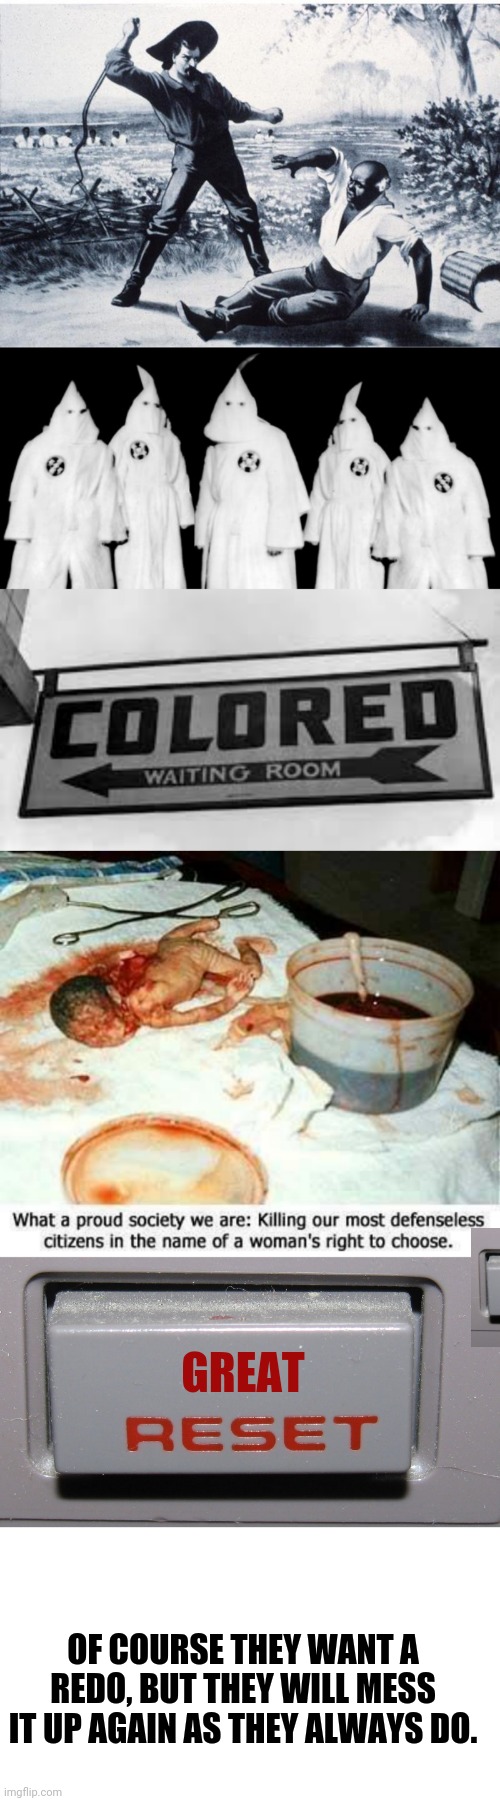 GREAT OF COURSE THEY WANT A REDO, BUT THEY WILL MESS IT UP AGAIN AS THEY ALWAYS DO. | image tagged in slave,kkk,jim crow colored,abortion,reset button,blank white template | made w/ Imgflip meme maker